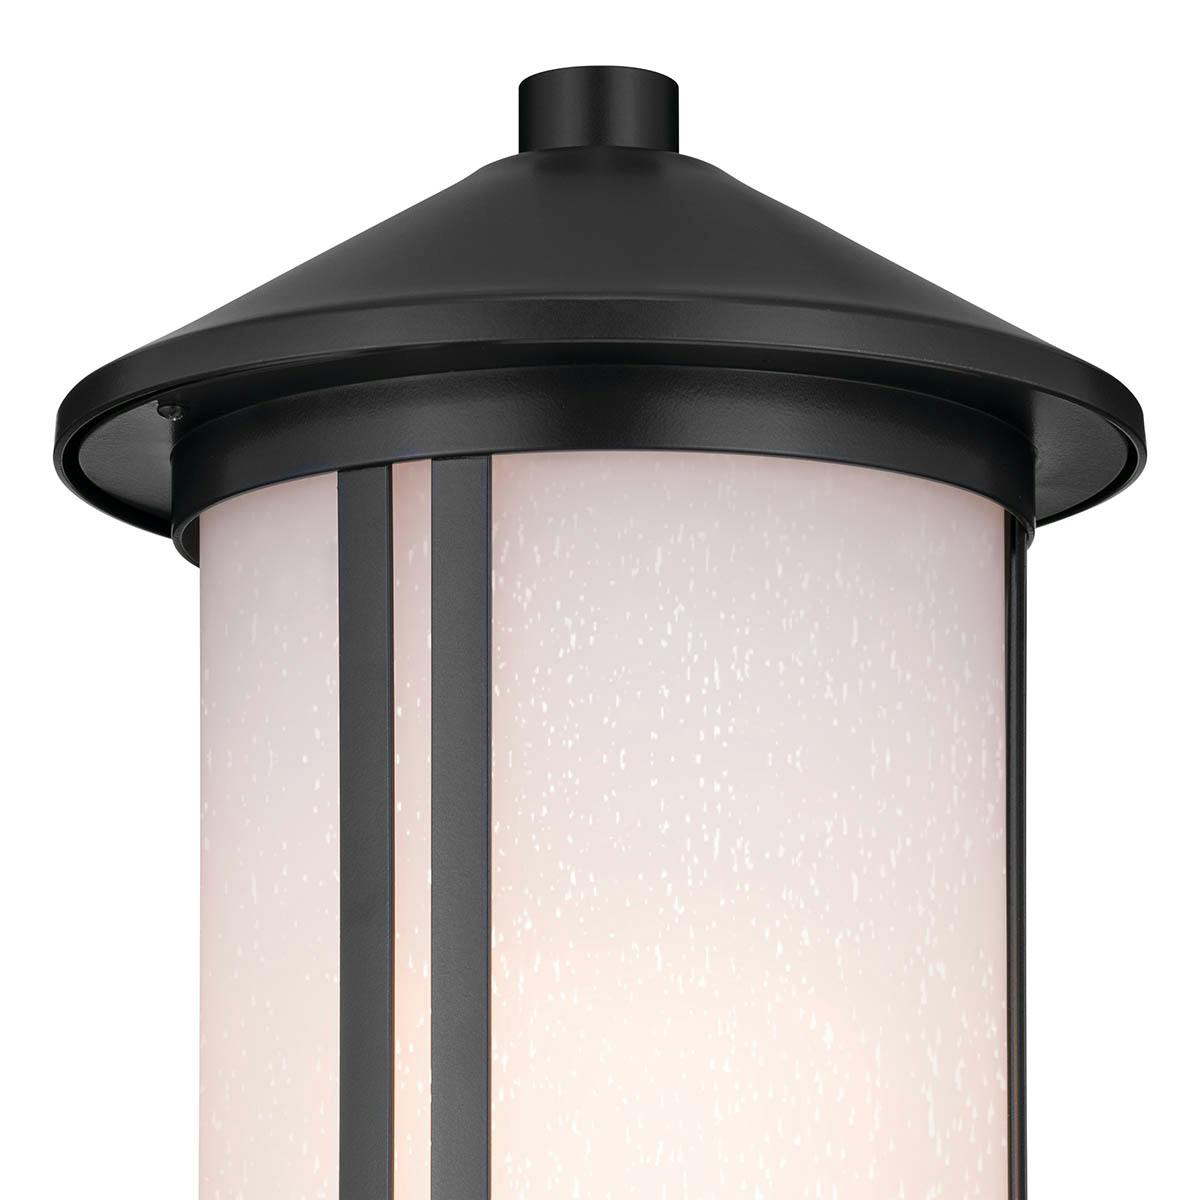 Close up view of the Lombard 17.25" 1 Light Post Lantern Black on a white background